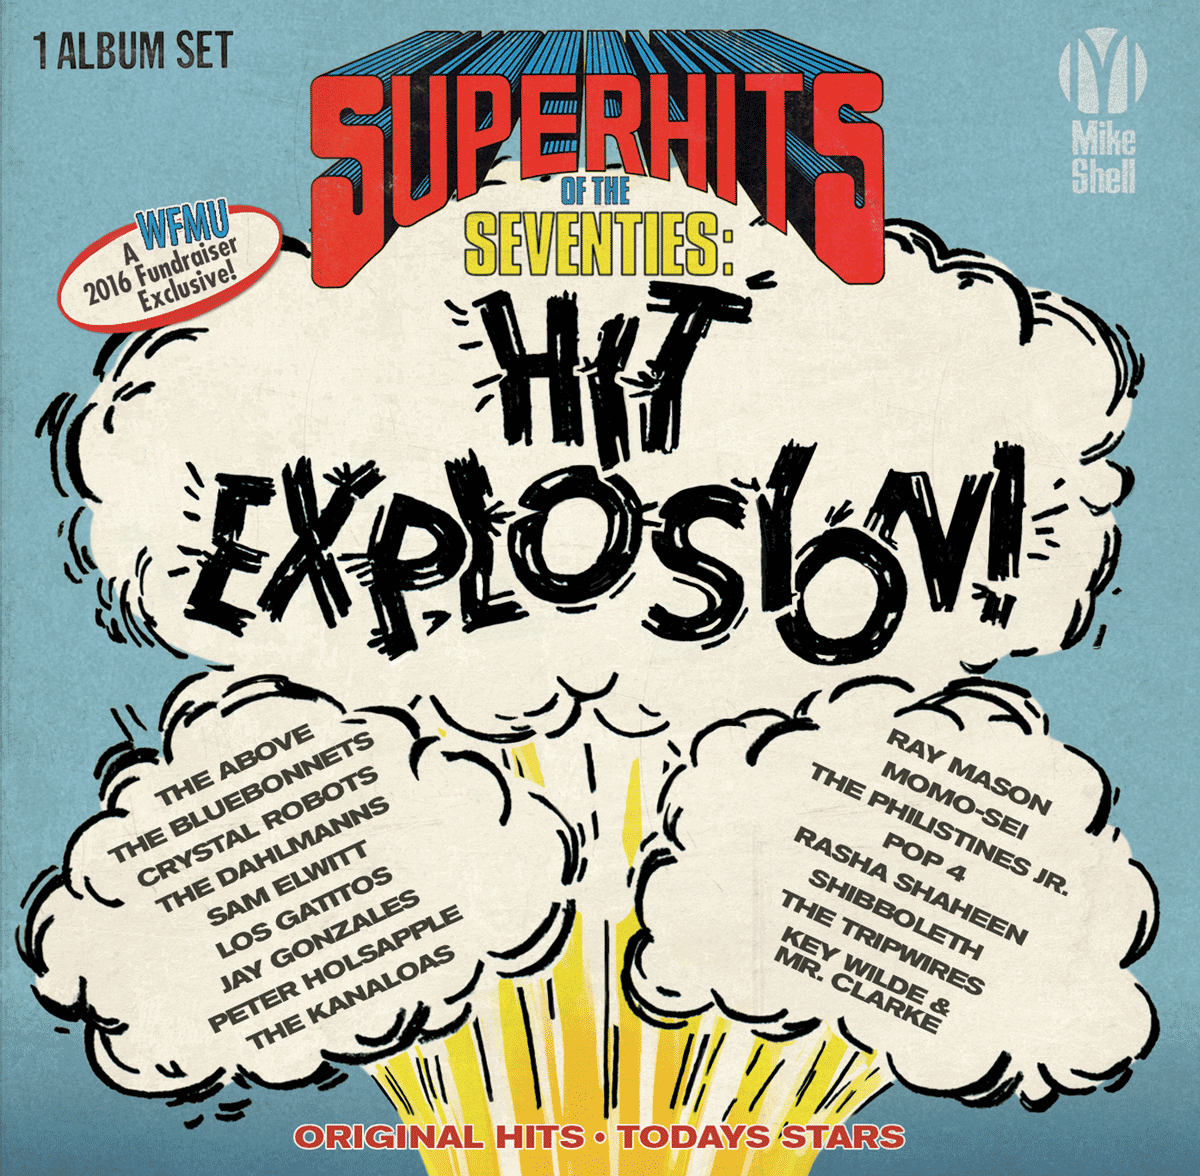 Michael Shelley's "Super Hits of the Seventies Hit Explosion!"